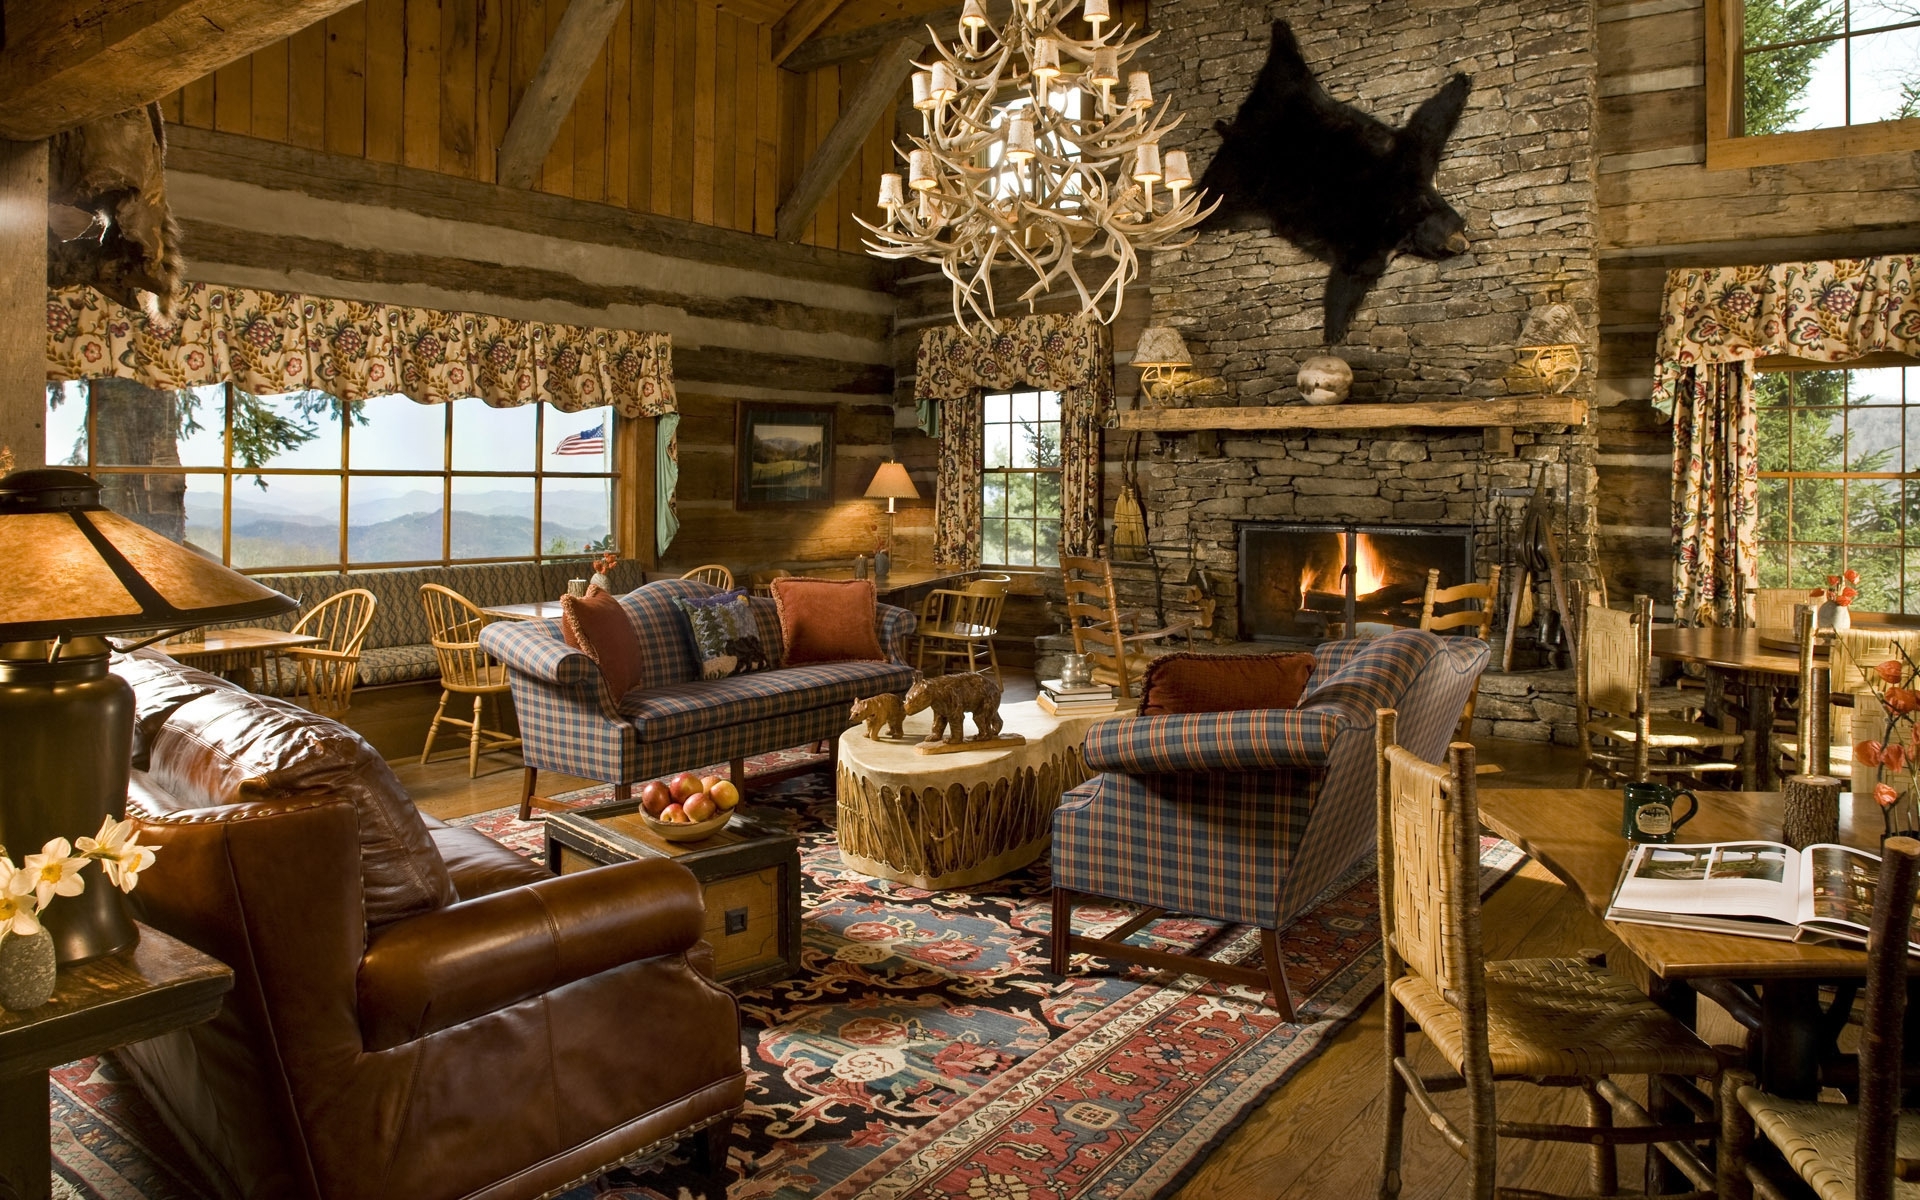 furniture, couch, rug, architecture, fireplace, brown, wood ...